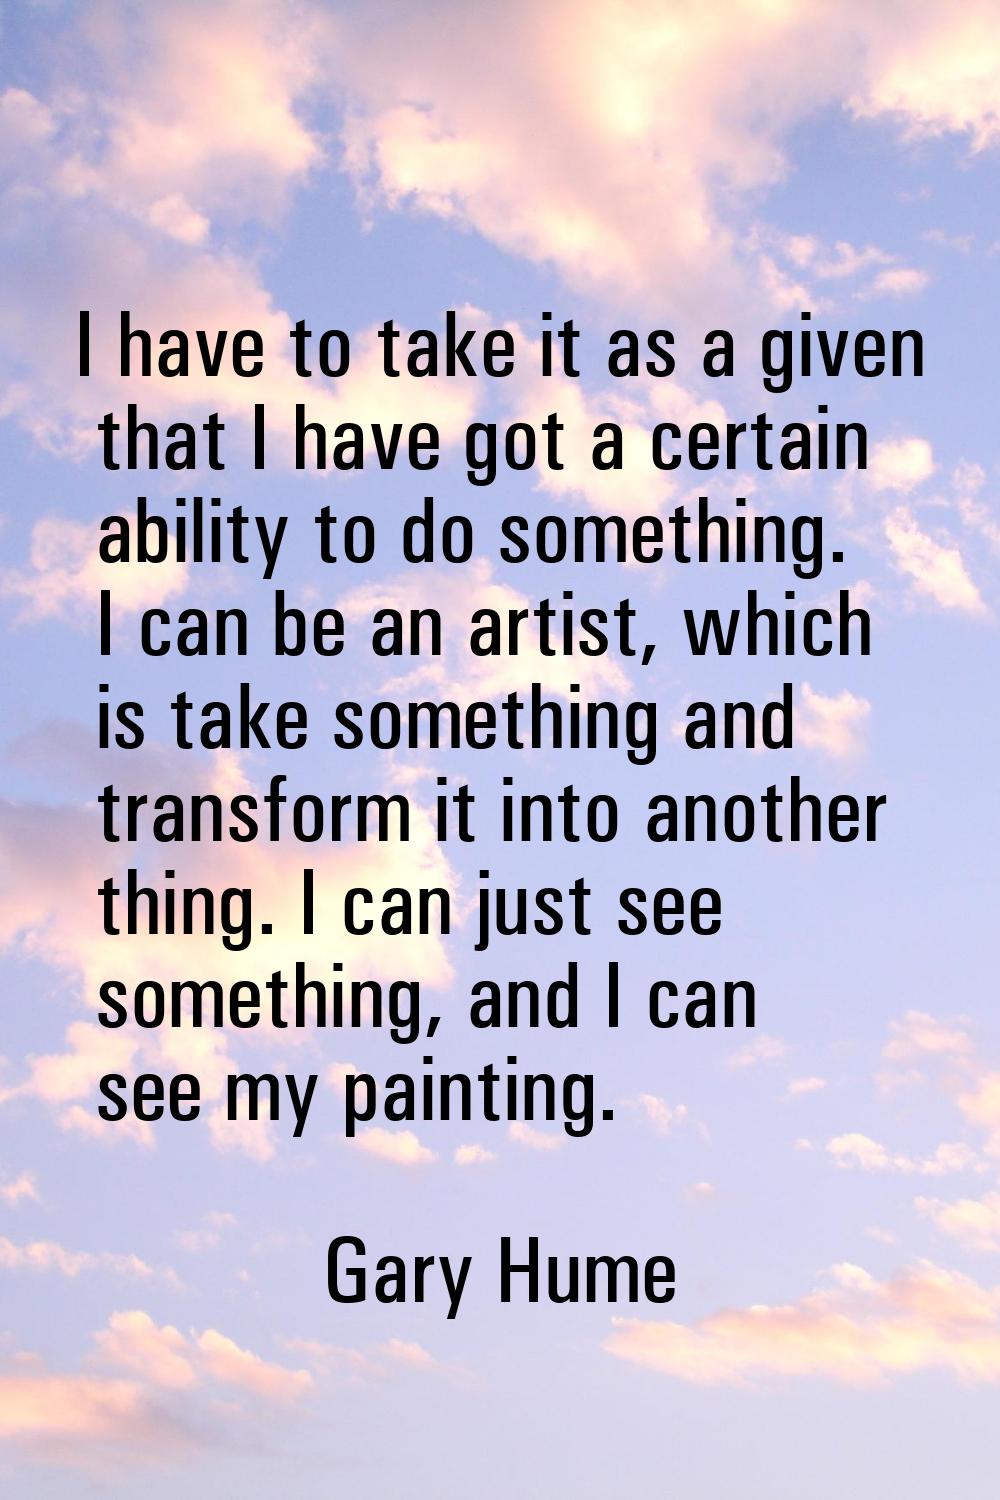 I have to take it as a given that I have got a certain ability to do something. I can be an artist,